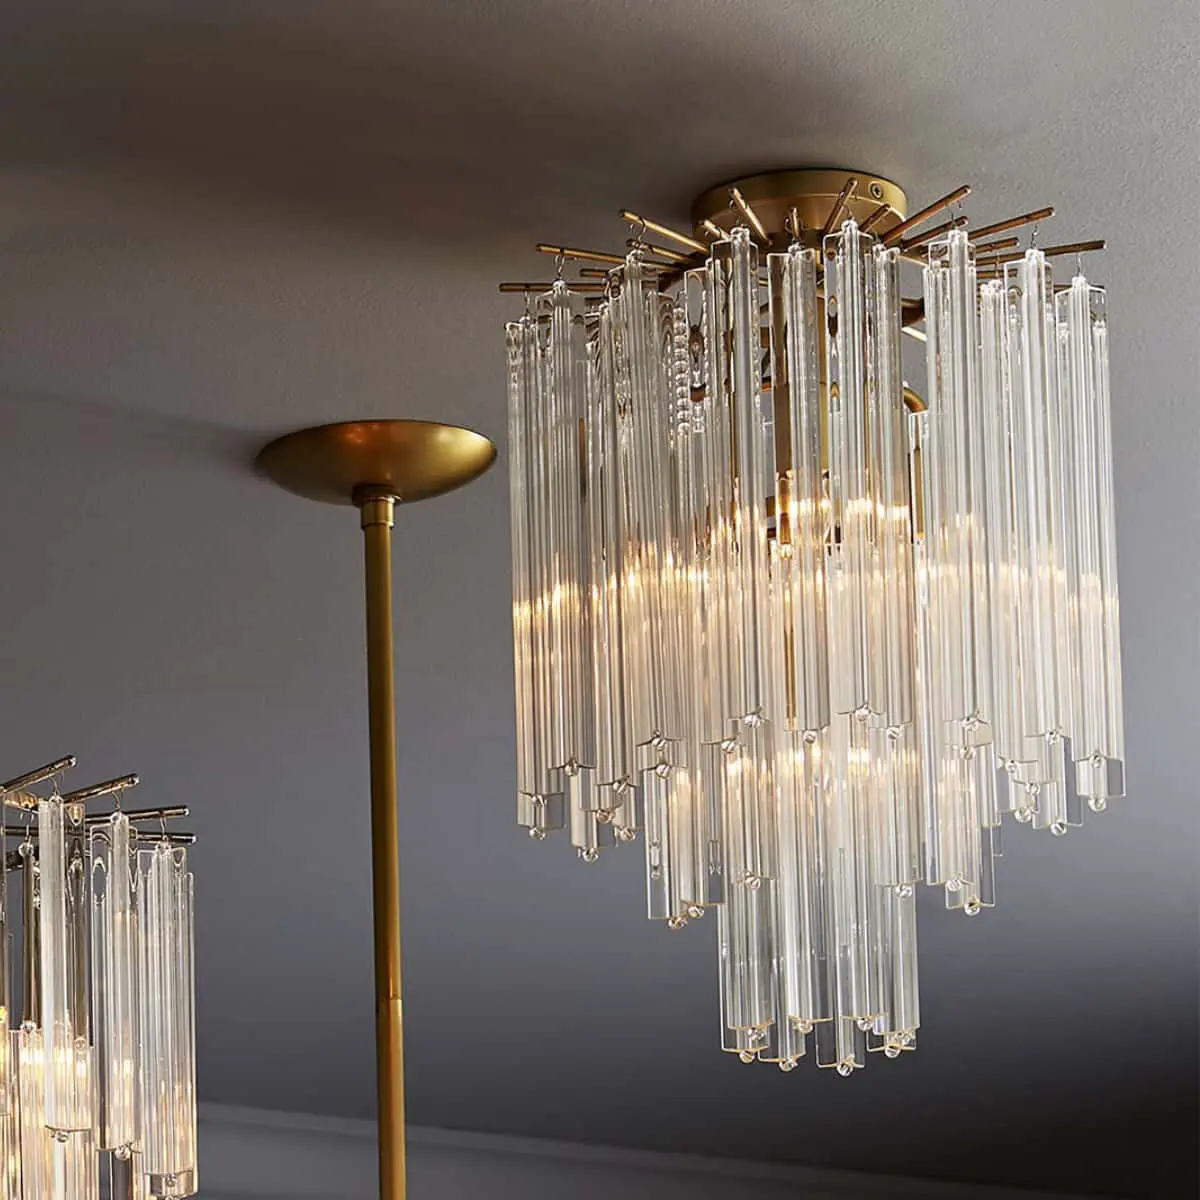 How To Choose The Right Light Bulb For, Can You Lower A Chandelier